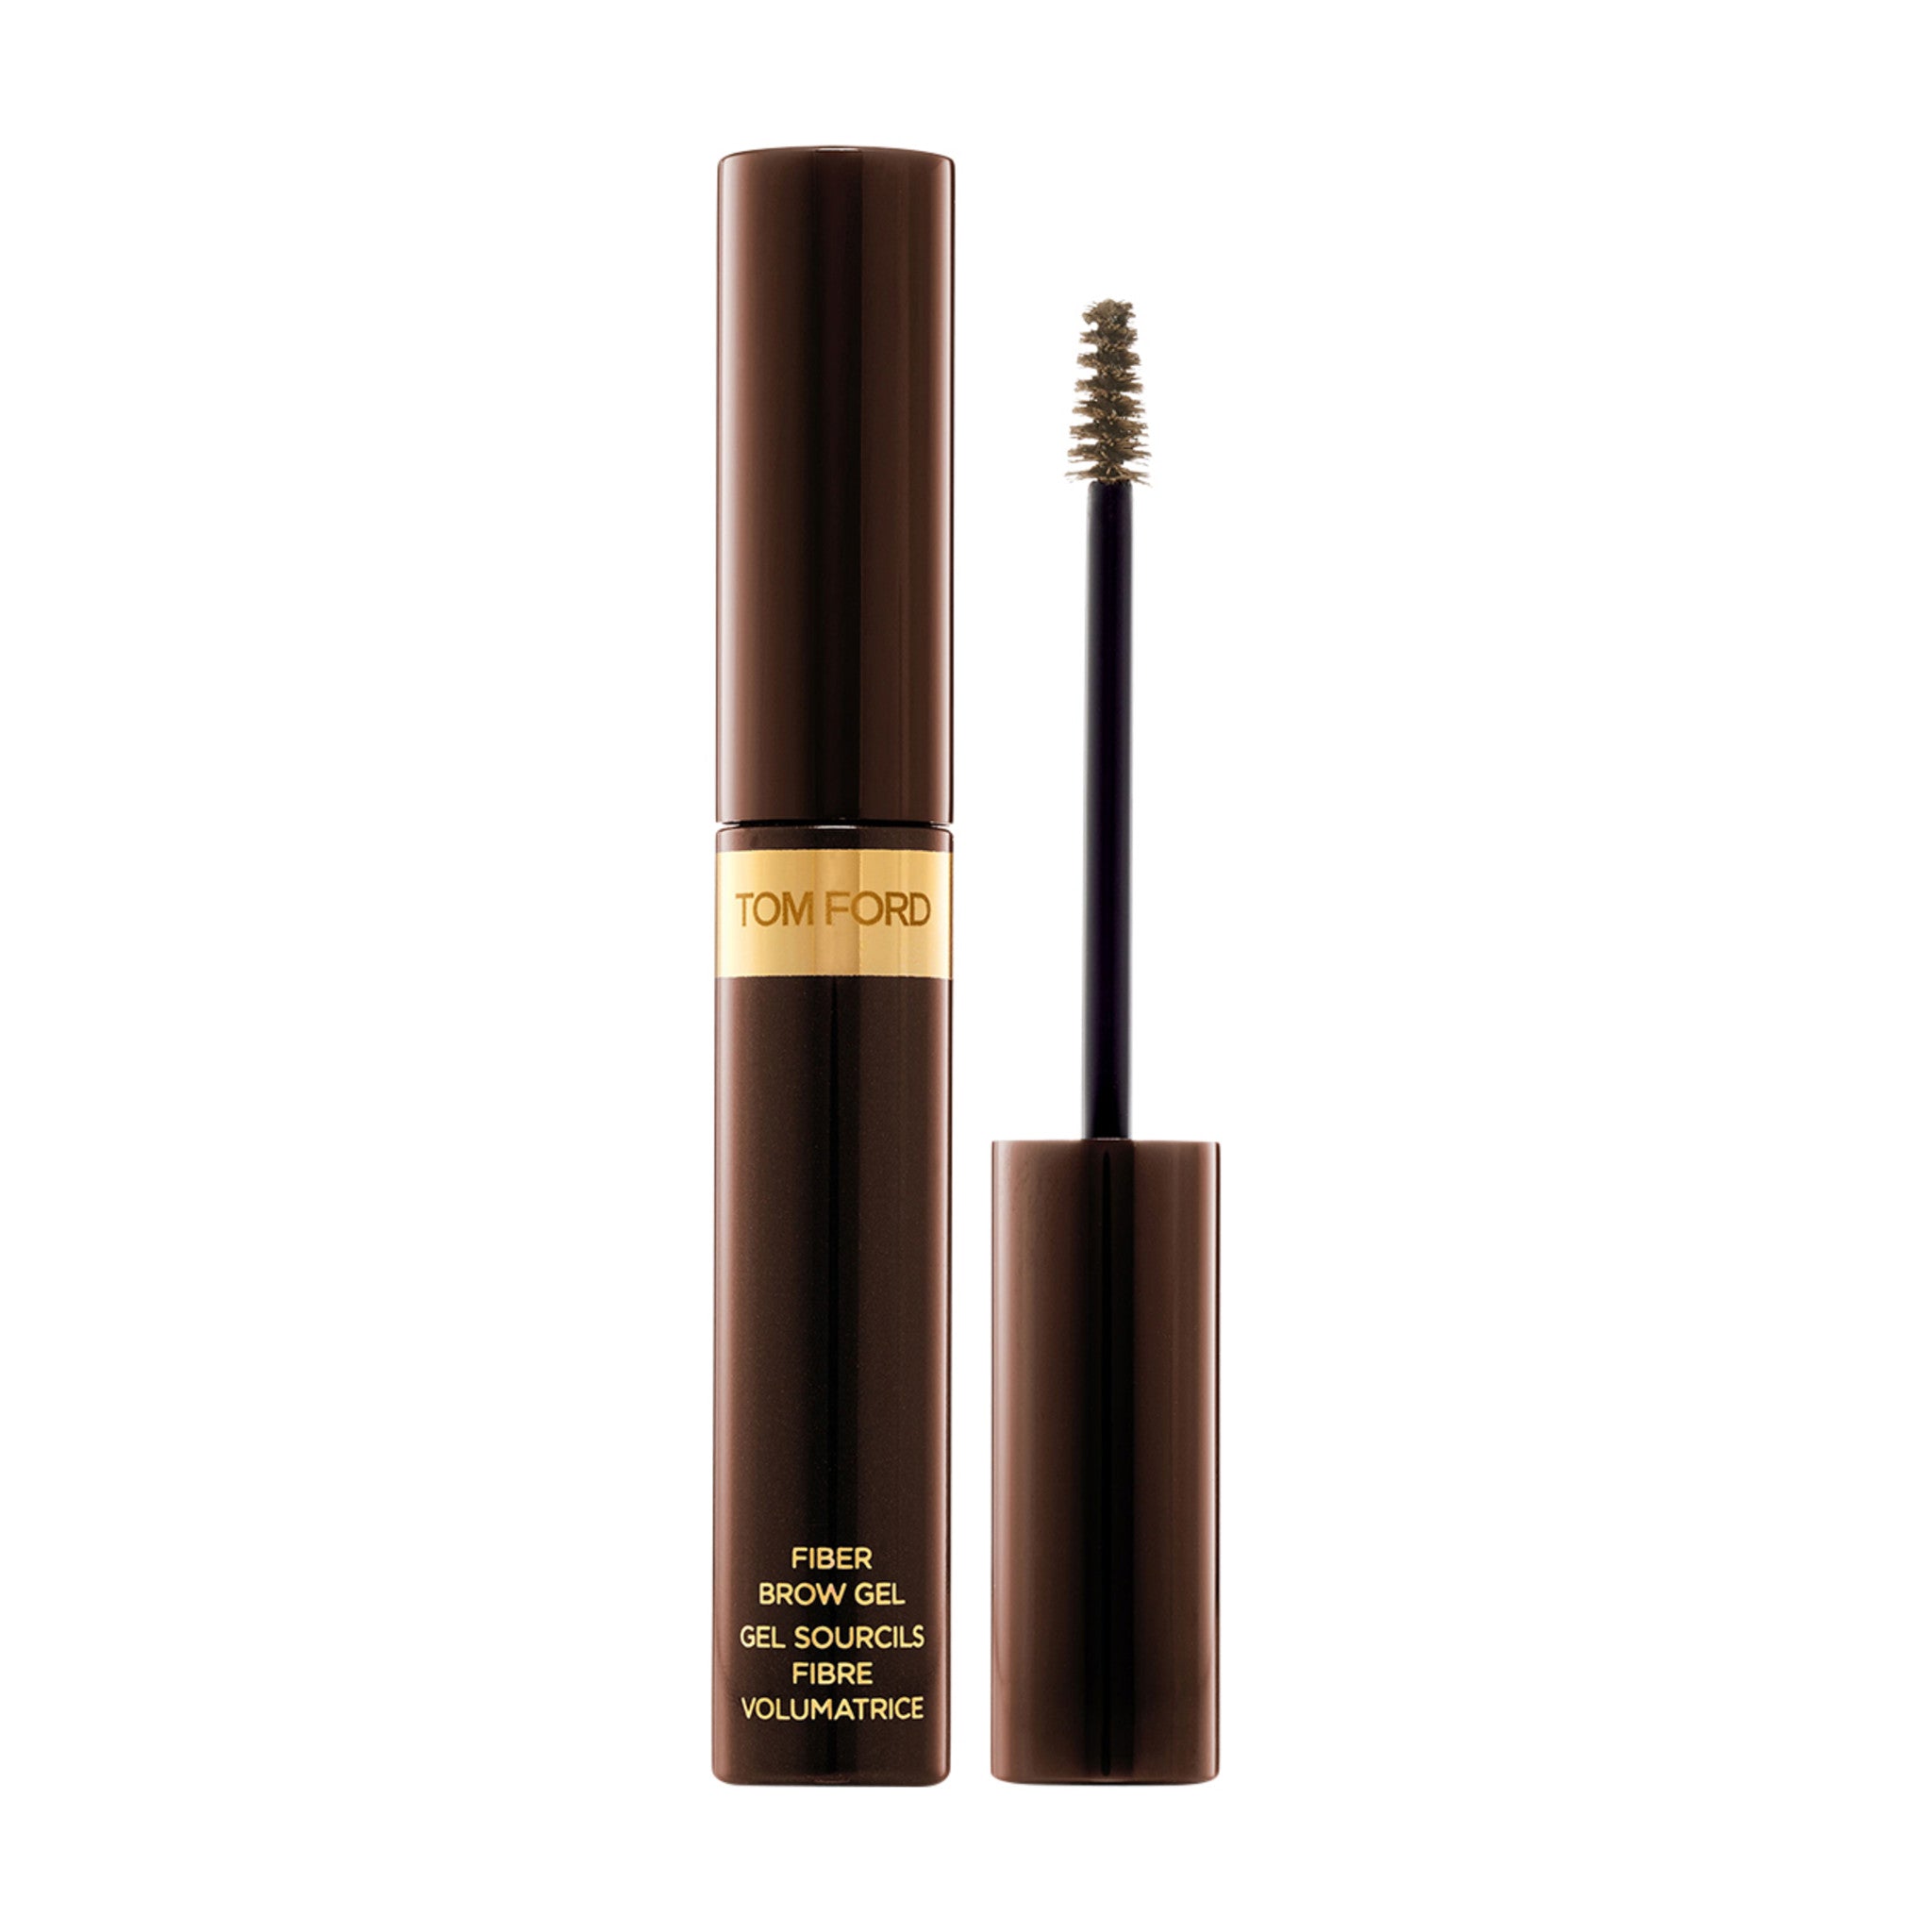 Tom Ford Fiber Brow Gel Color/Shade variant: Blonde main image. This product is in the color black